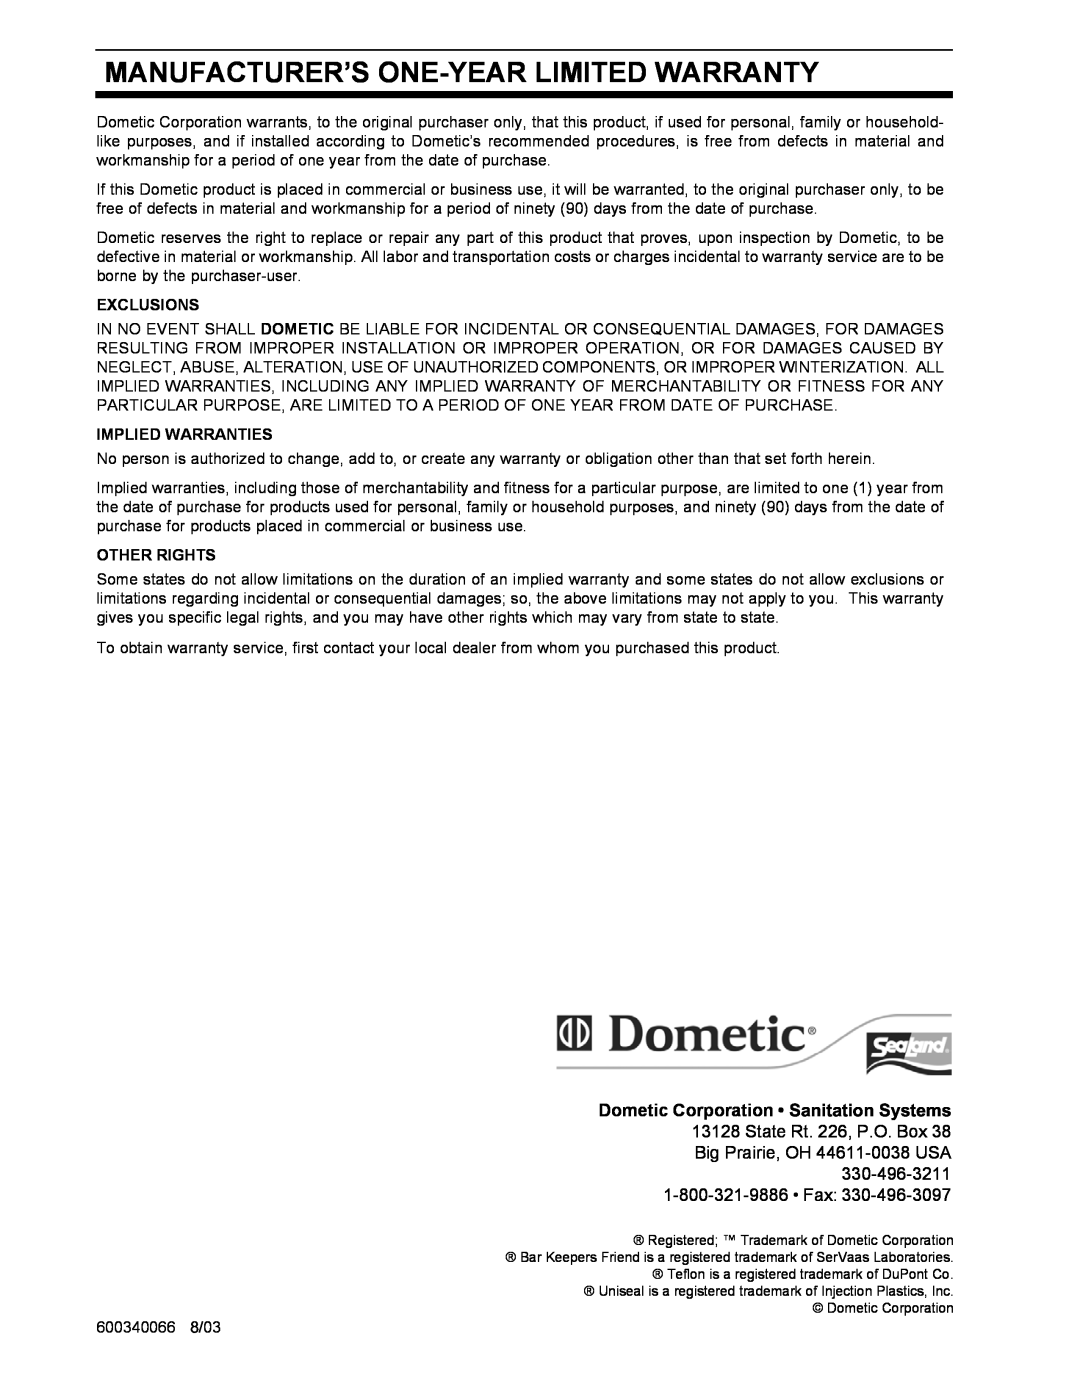 Dometic 500Plus Series, 1000 Series Manufacturer’S One-Yearlimited Warranty, Dometic Corporation Sanitation Systems 